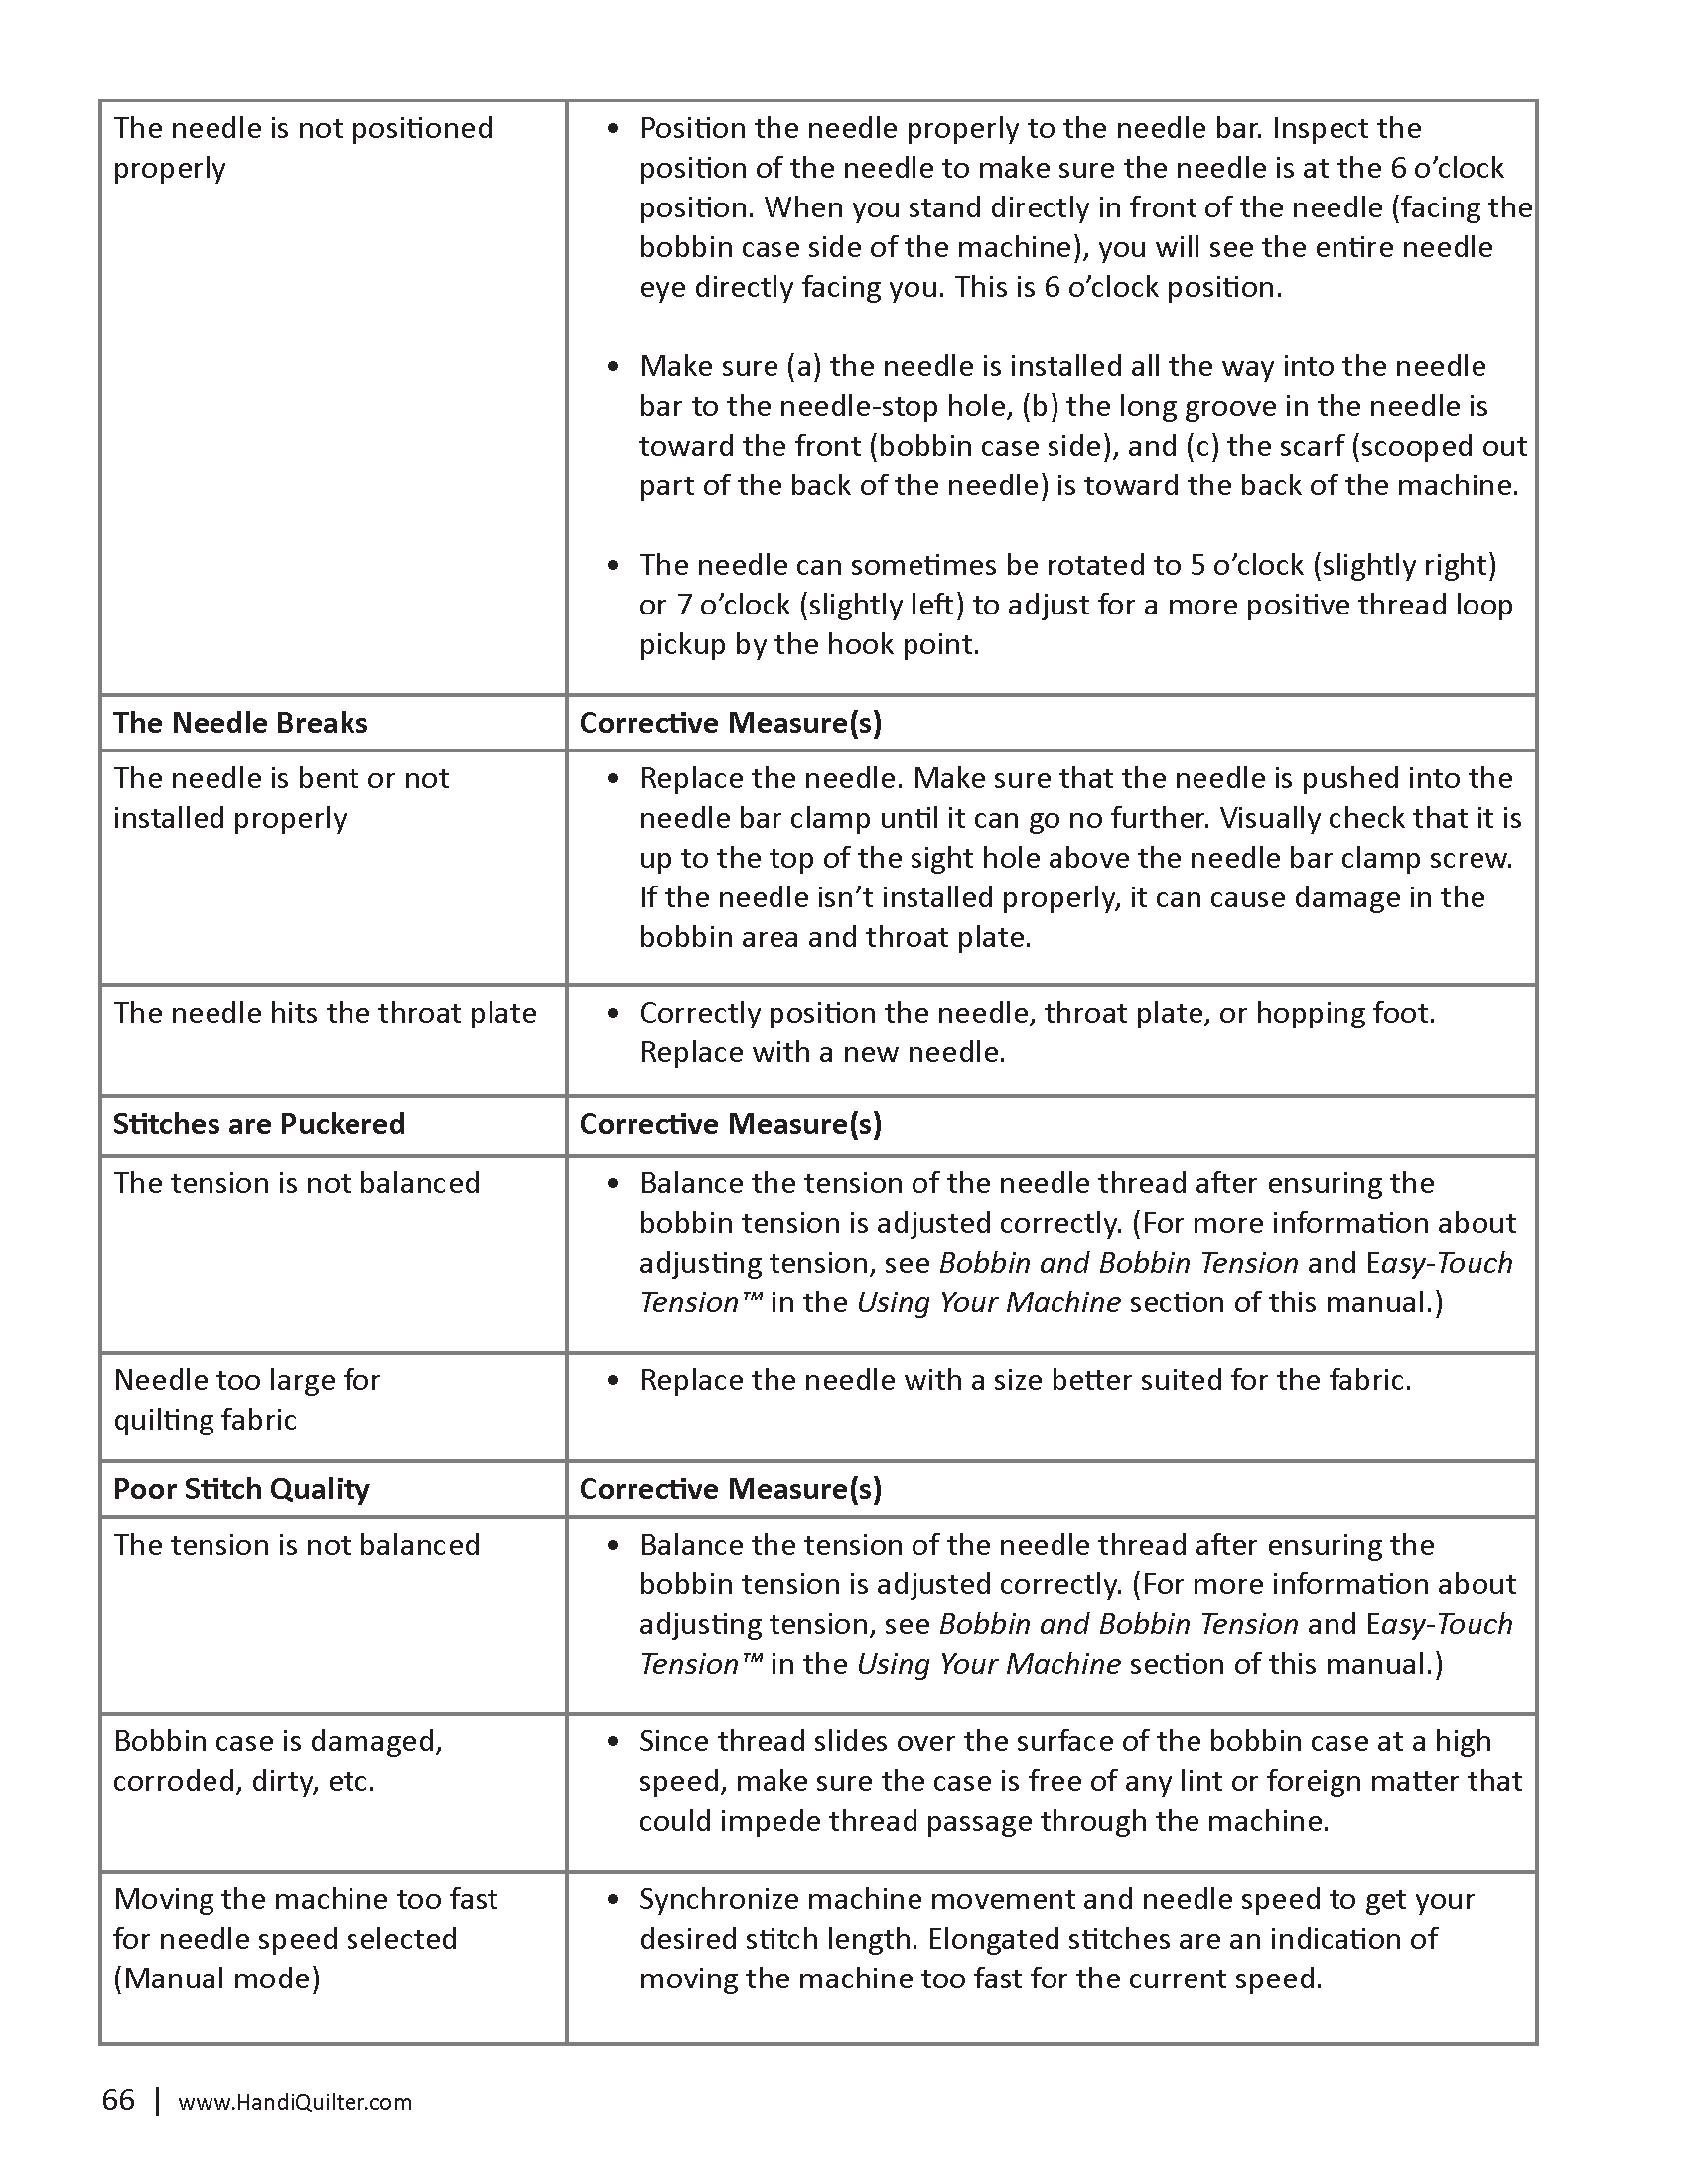 HQ-Forte-User-Manual-ALL-2_Page_67.png